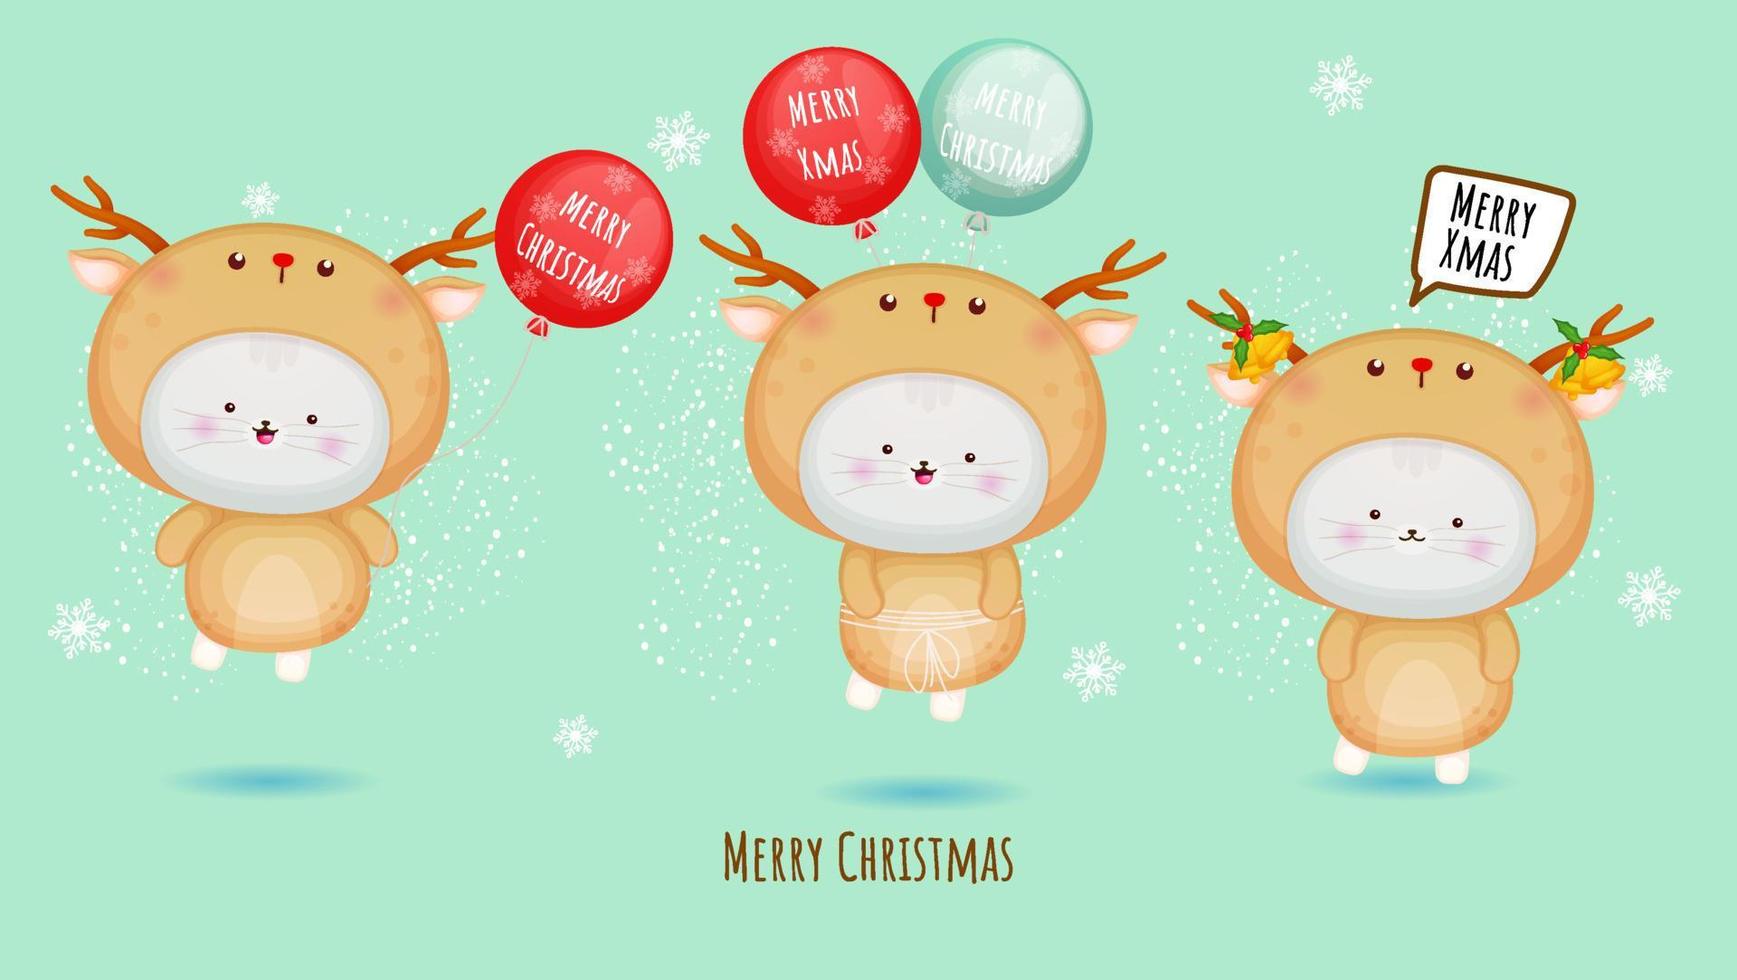 Cute kitty in deer costume for merry christmas with balloon vector